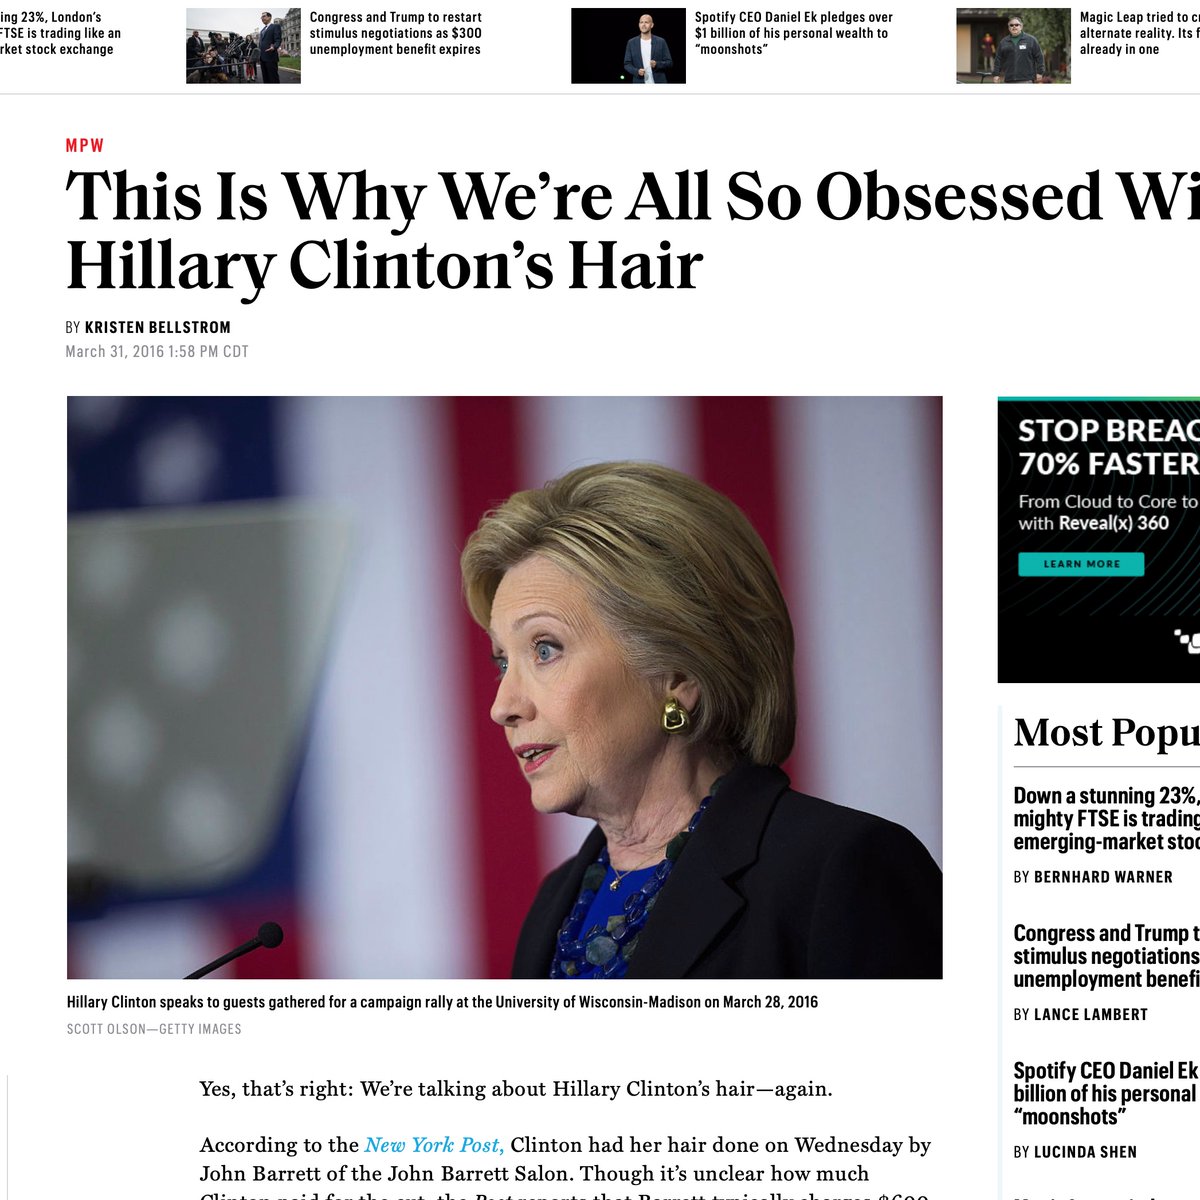 Google shows the top stories about Hillary the day after she gave that Supreme Court speech:1. Fortune: "This is Why We're So Obsessed With Hillary's Hair"2. WP: "What Some Men Have Against Hillary Clinton"3. The Atlantic: "On Hillary Clinton as a 'Congenital Liar'" 5/